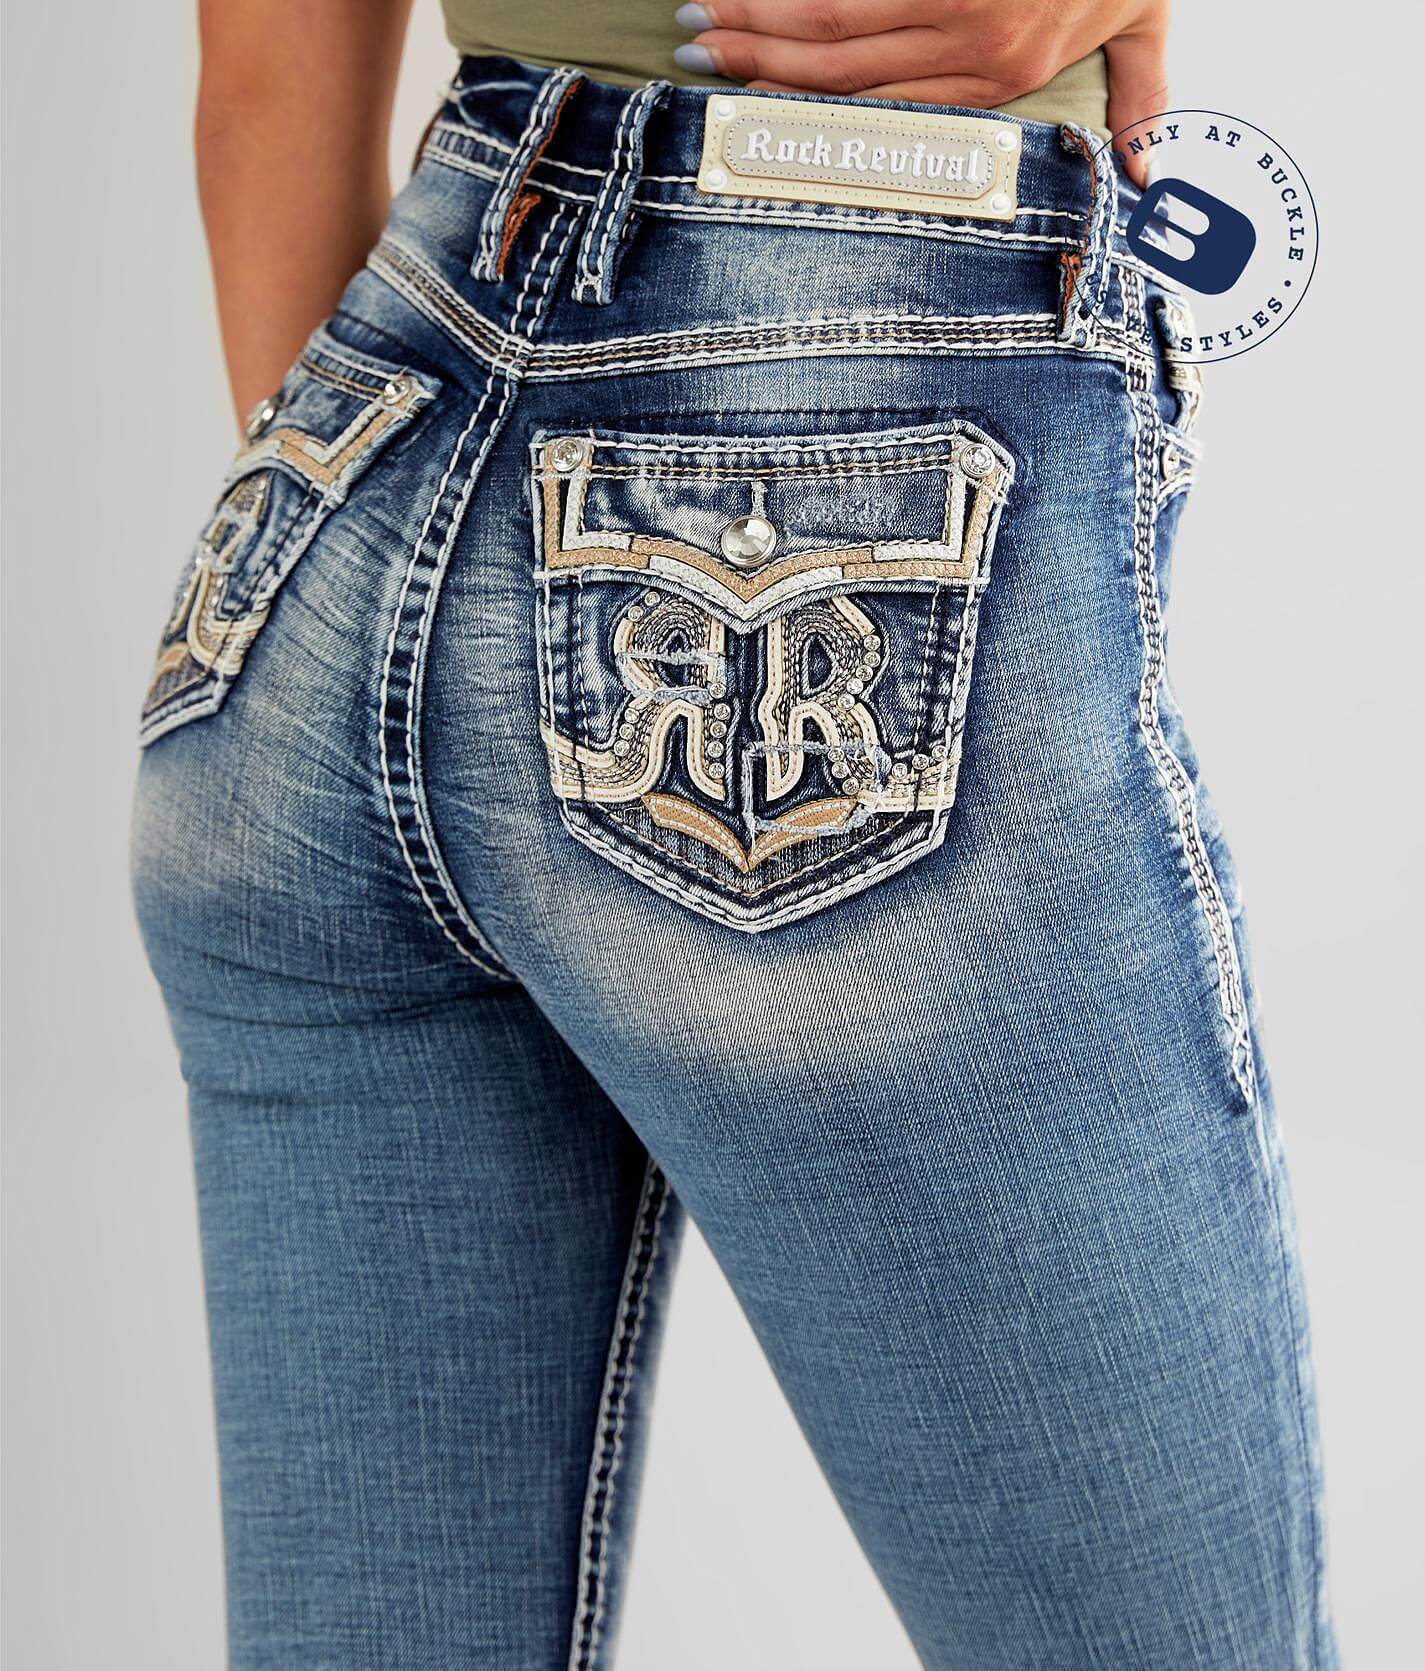 rock revival jeans cost